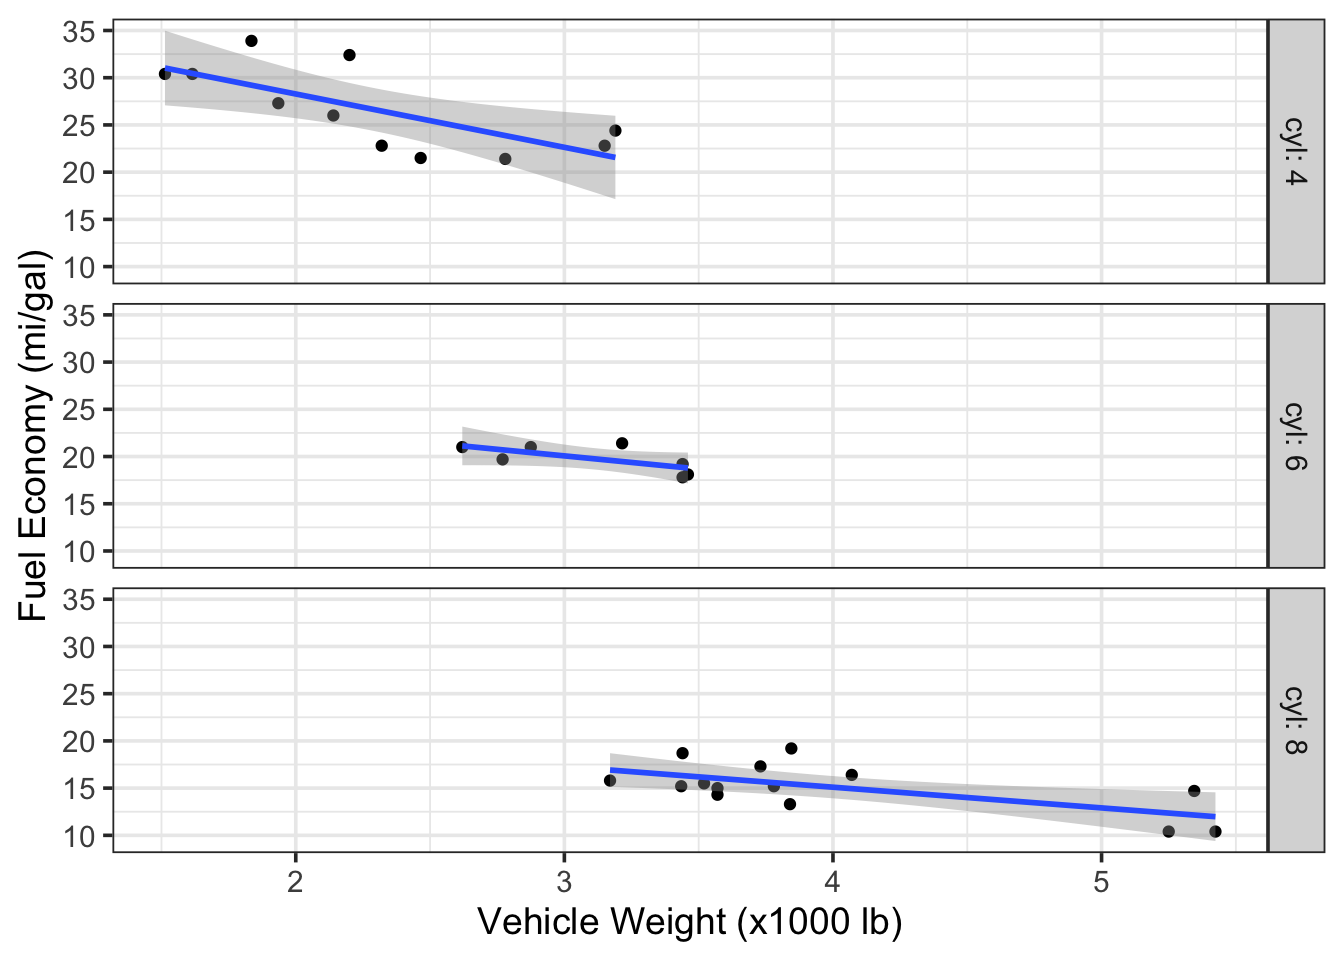 Scatterplots of fuel economy vs. vehicle weight by number of cylinders in the engine (data from the `mtcars` dataset).